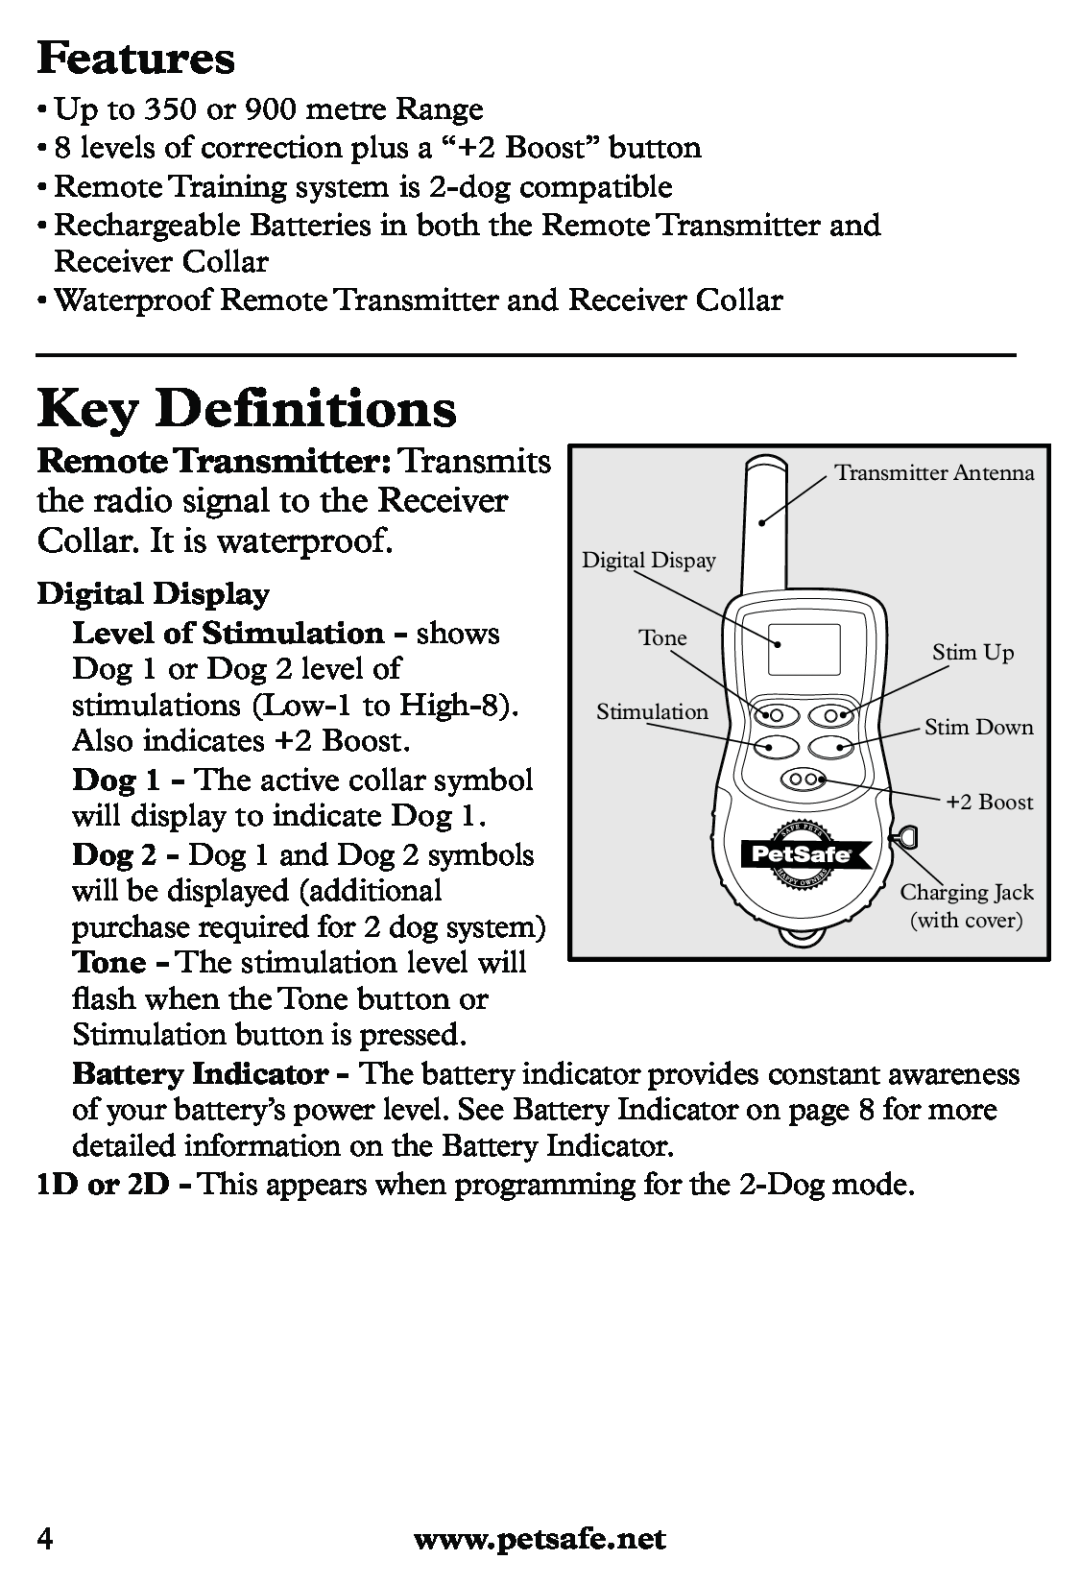 Petsafe PDT20-11939 Key Definitions, Features, Remote Transmitter Transmits, the radio signal to the Receiver 